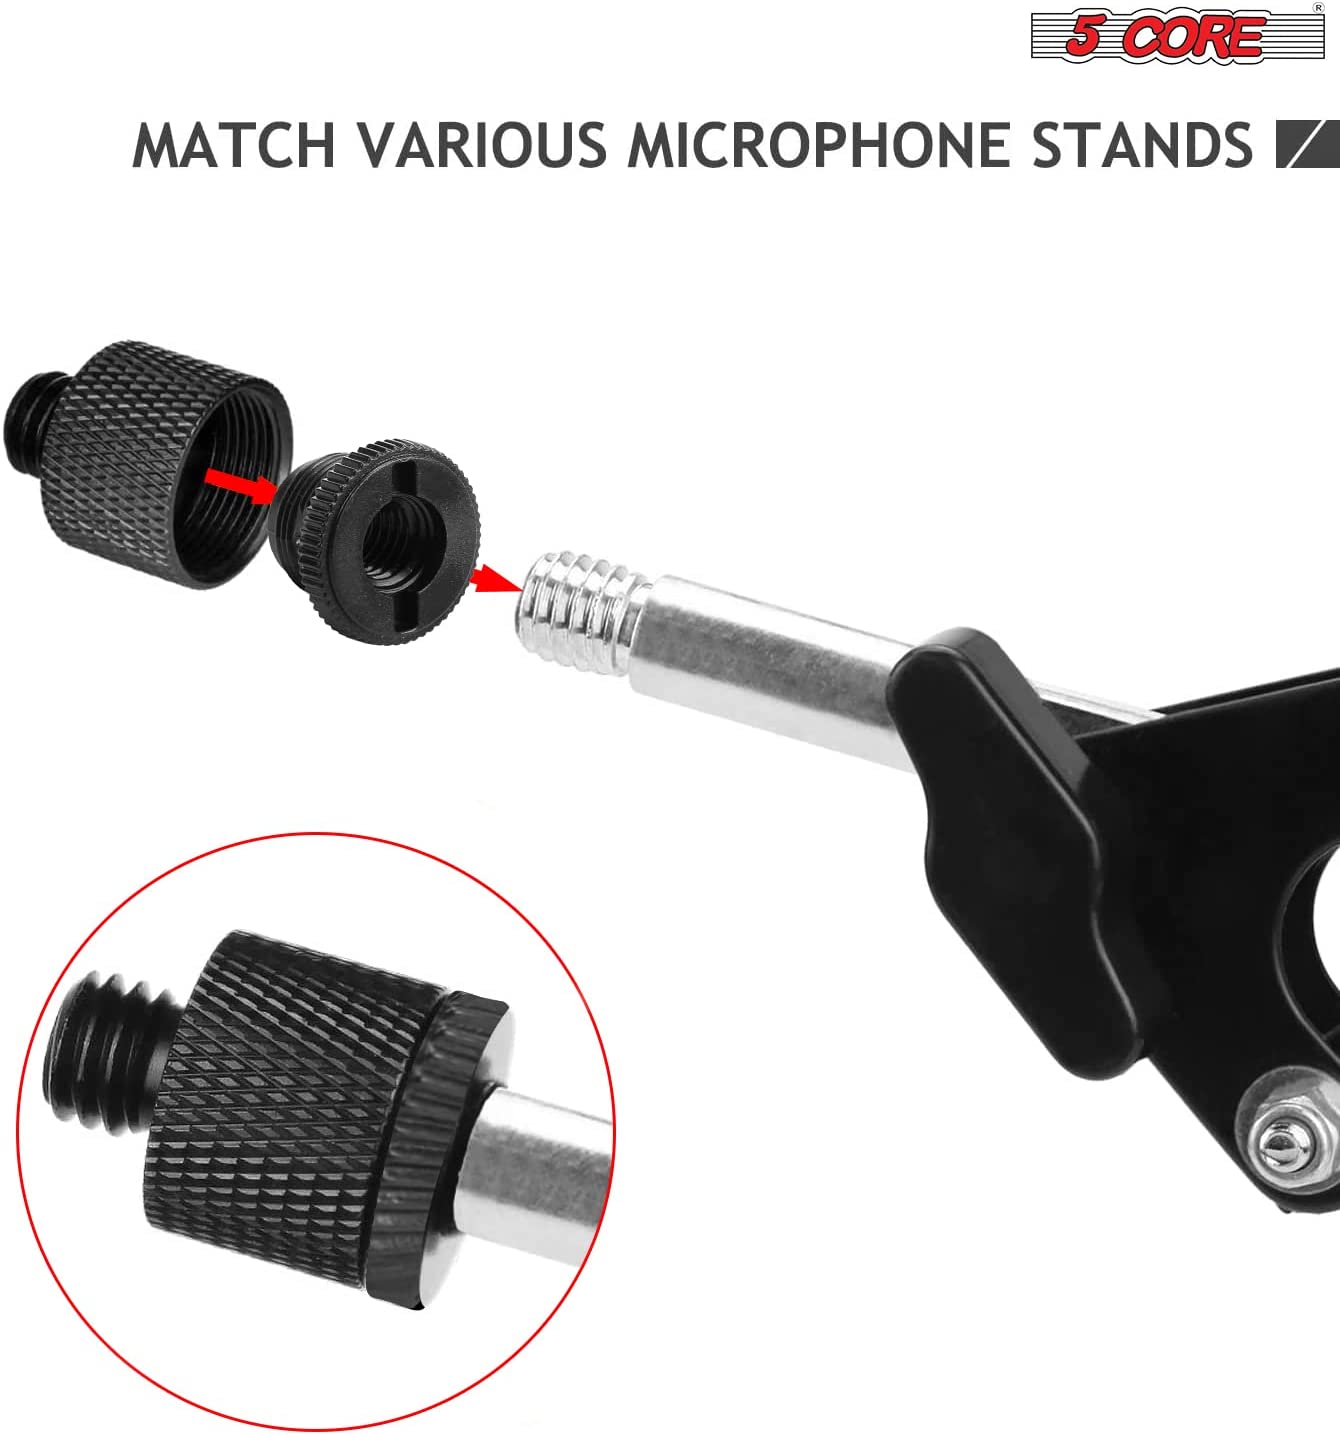 5 Core Mic Stand Adapter 4 Pieces Black 3/8 Female to 5/8 Male Plastic Mic Screw Adapter Microphone Tripod Stand Screw - MS ADP P BLK 4PCS-3